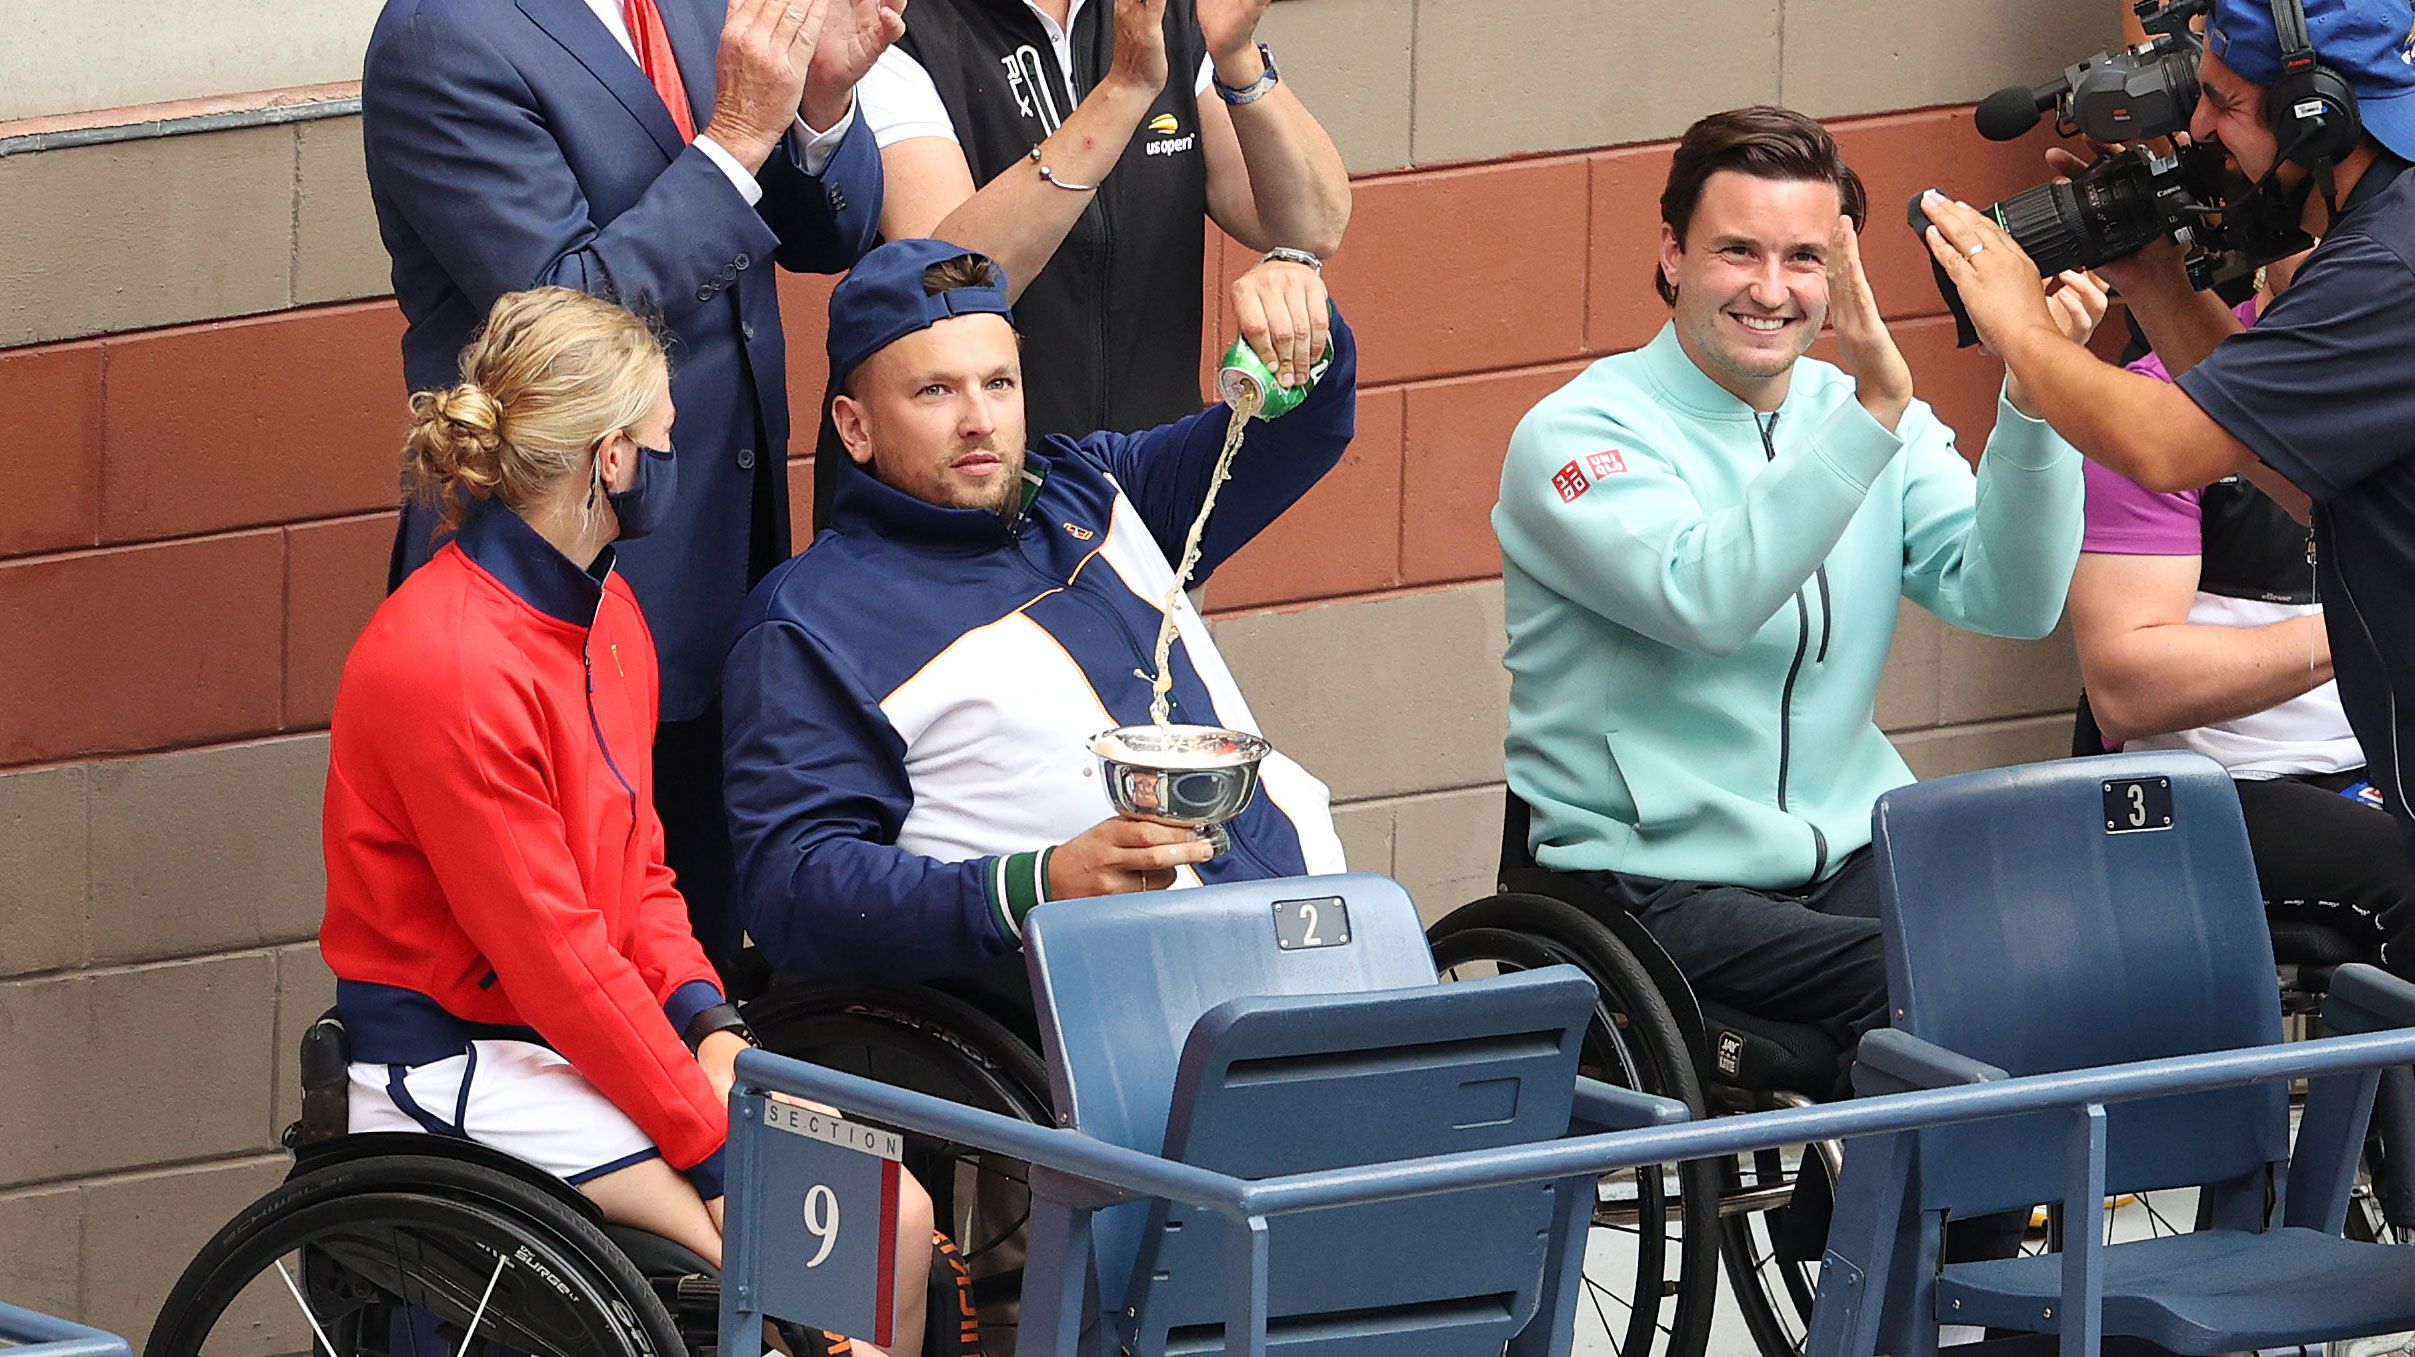 EXCLUSIVE: Dylan Alcott reflects on his tennis career and what's next for him after retirement